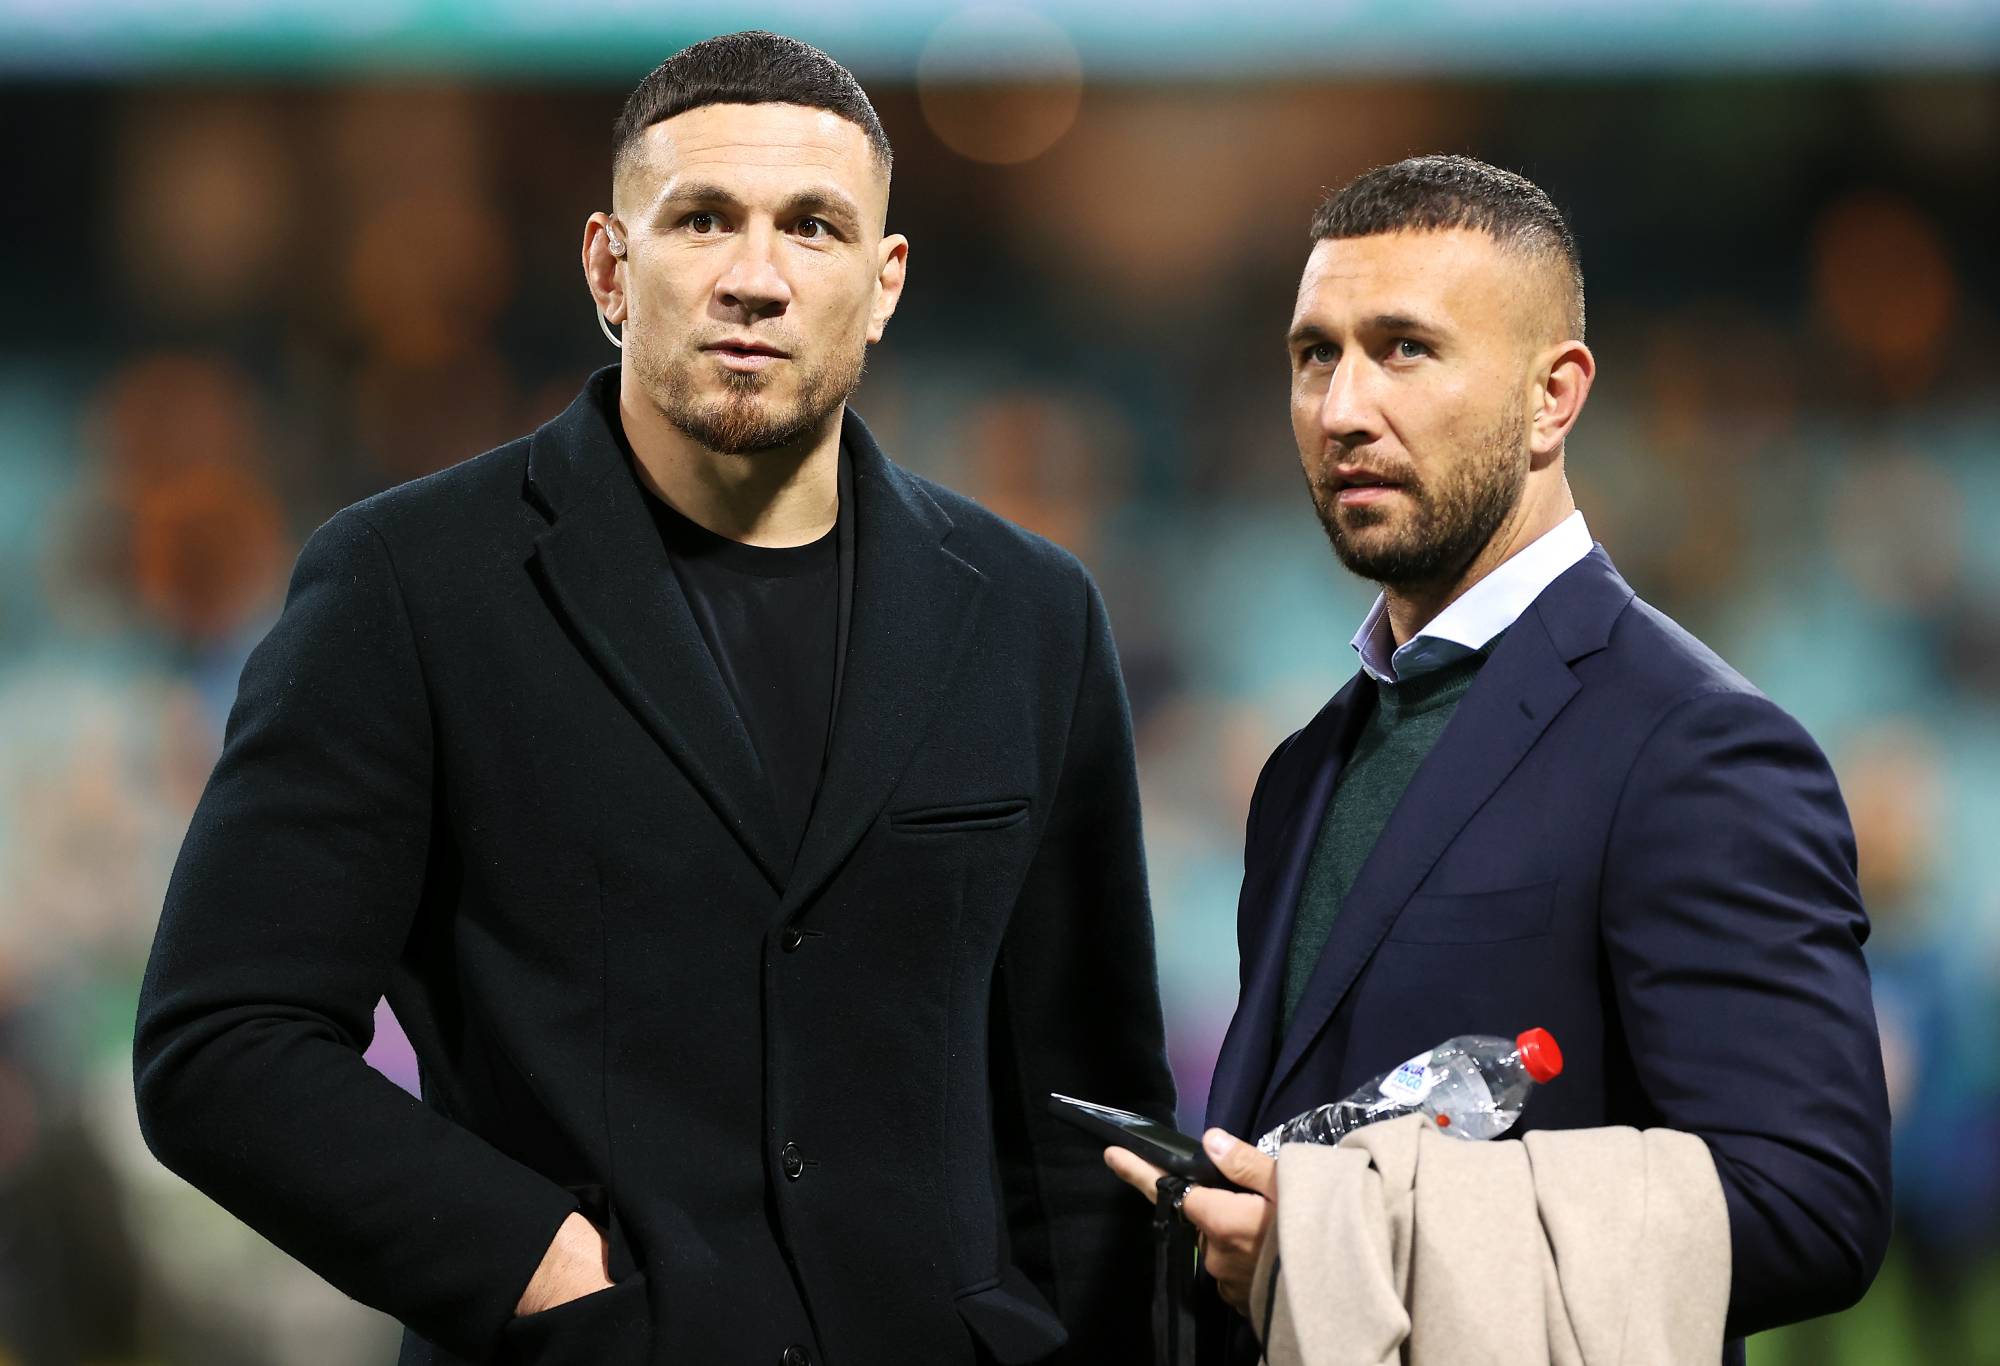 Former All Black Sonny Bill Williams speaks to Quade Cooper of the Wallabies before game three of the International Test match series between the Australia Wallabies and England at the Sydney Cricket Ground on July 16, 2022 in Sydney, Australia. (Photo by Mark Kolbe/Getty Images